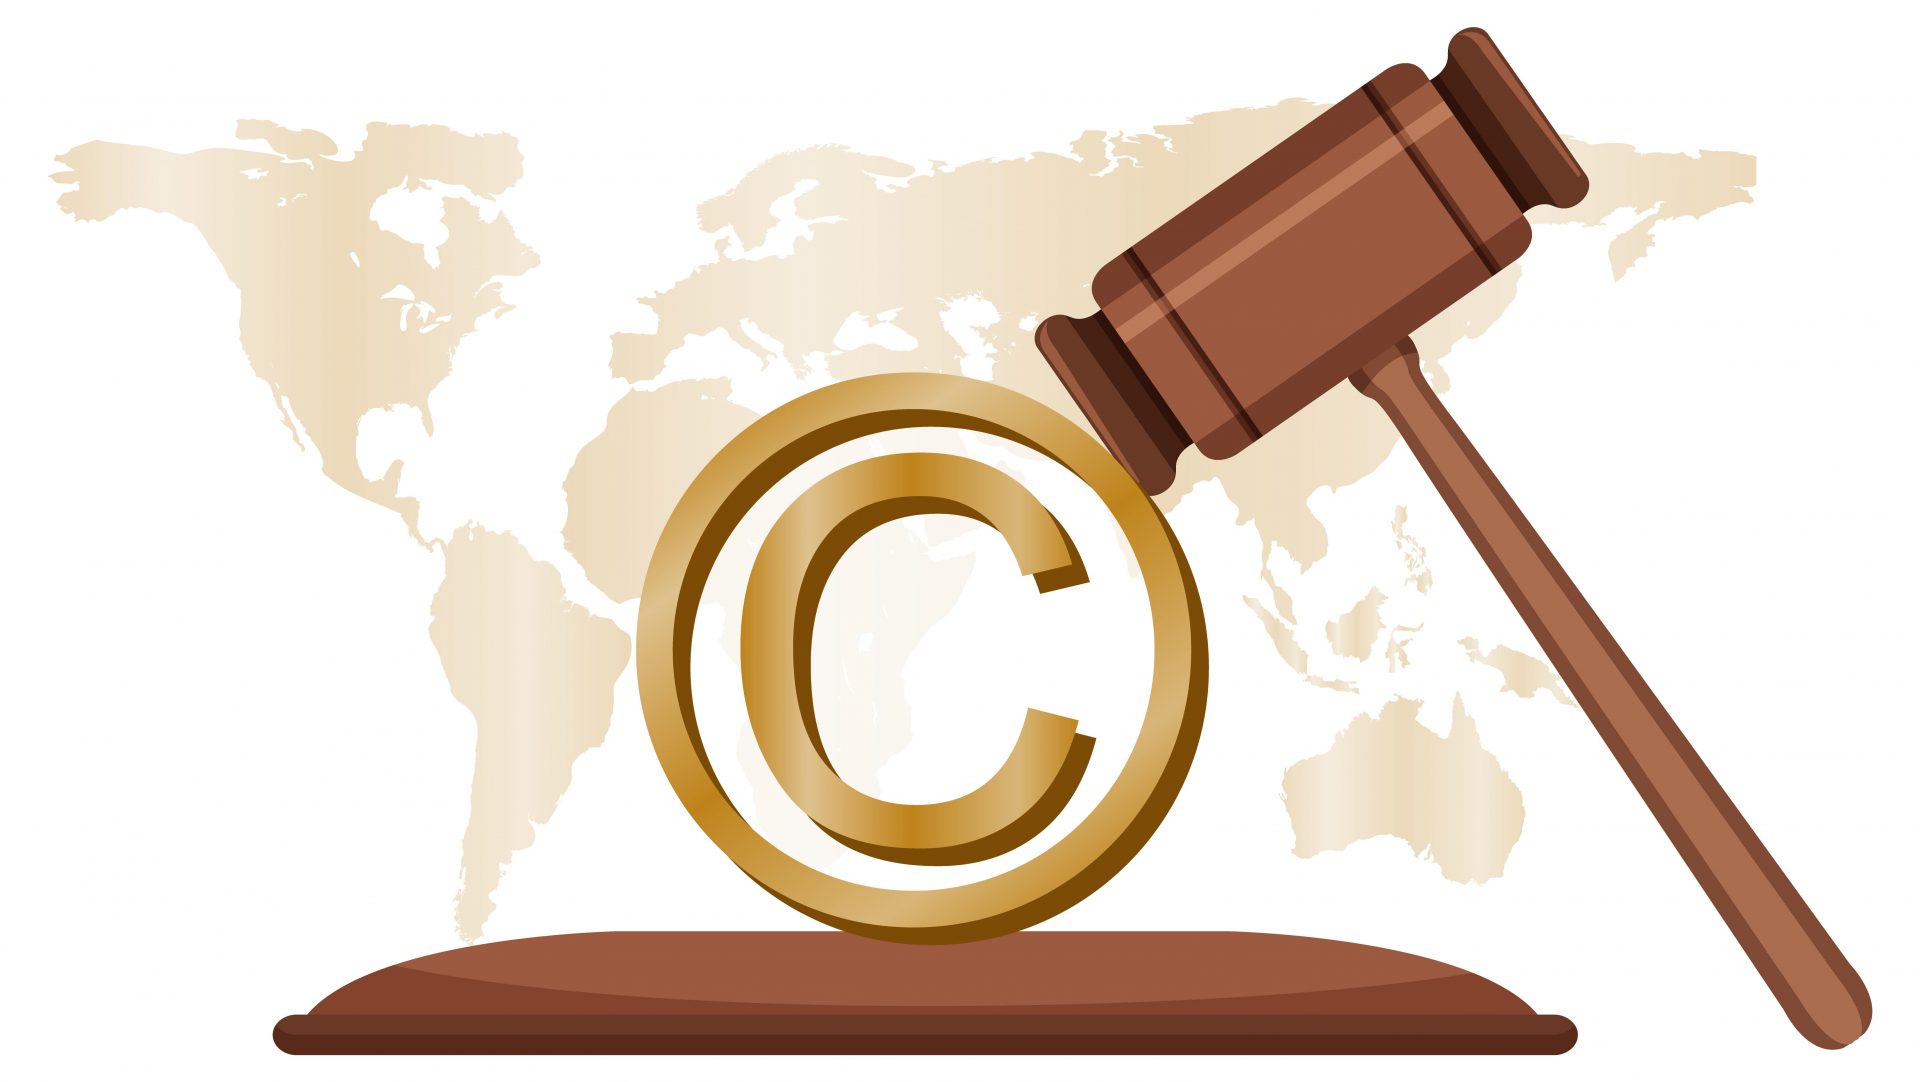 THE USE OF AUTOMATION IN COPYRIGHT ENFORCEMENT: A SLIPPERY SLOPE